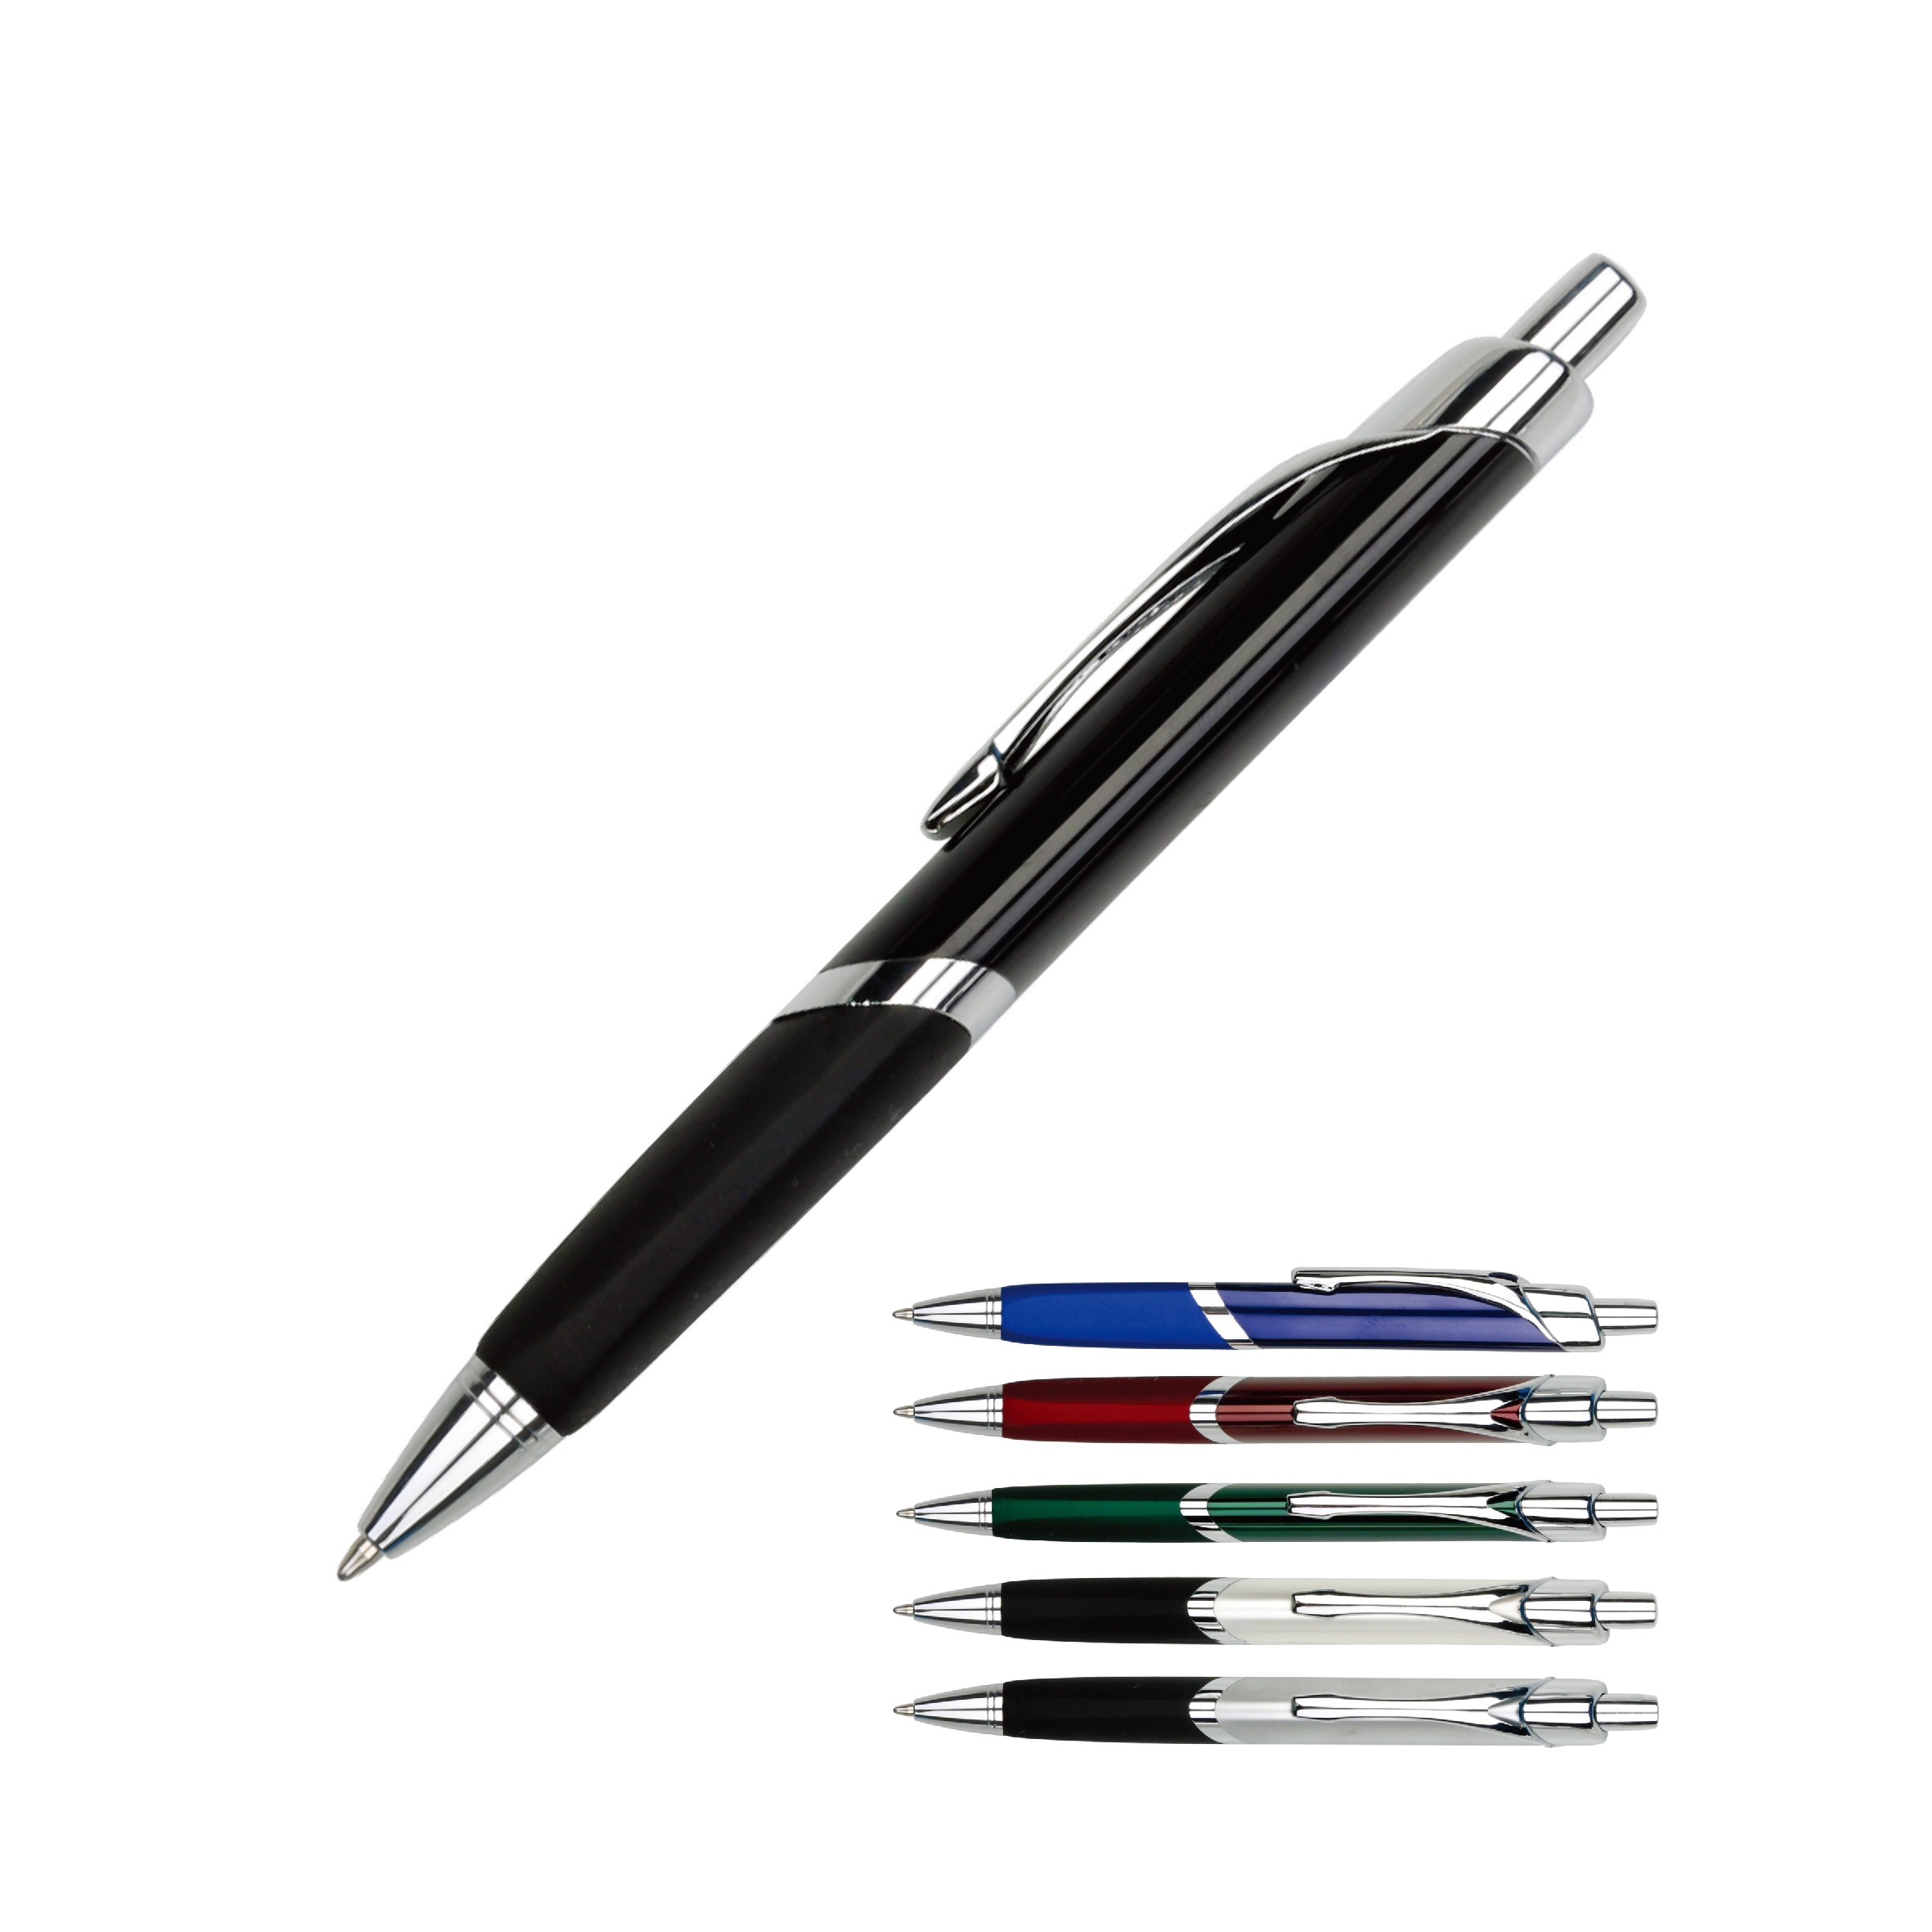 0.7mm/1.0mm Retractable Metal Triangular Ball Pen With Rubberized Grip